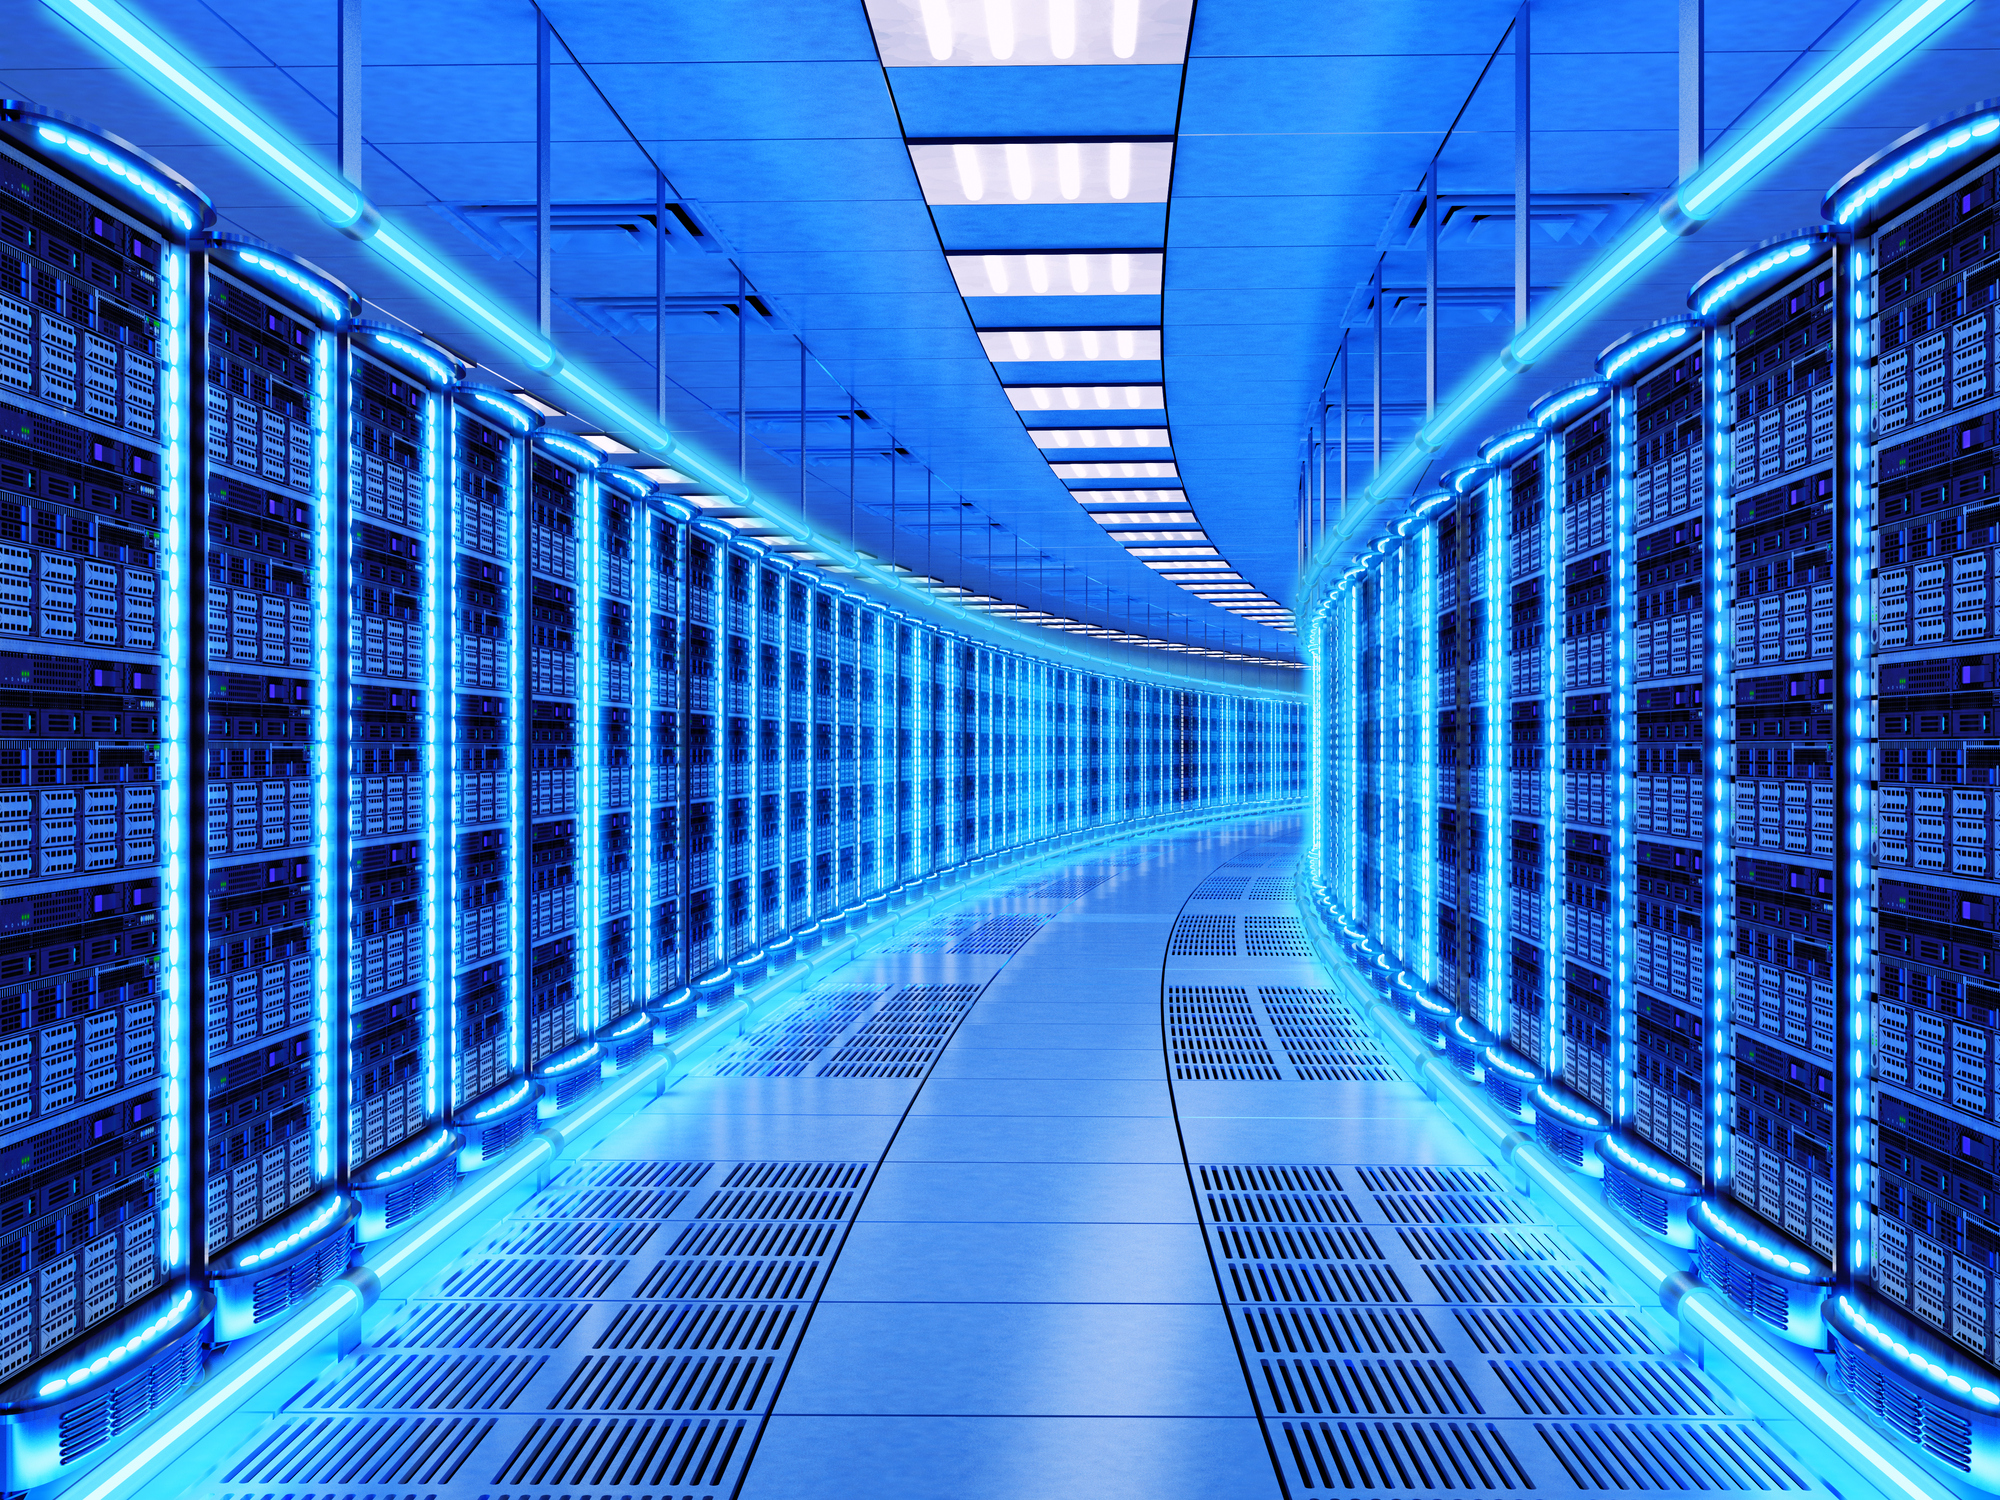 6 Key Data Center Trends as We Head into 2020